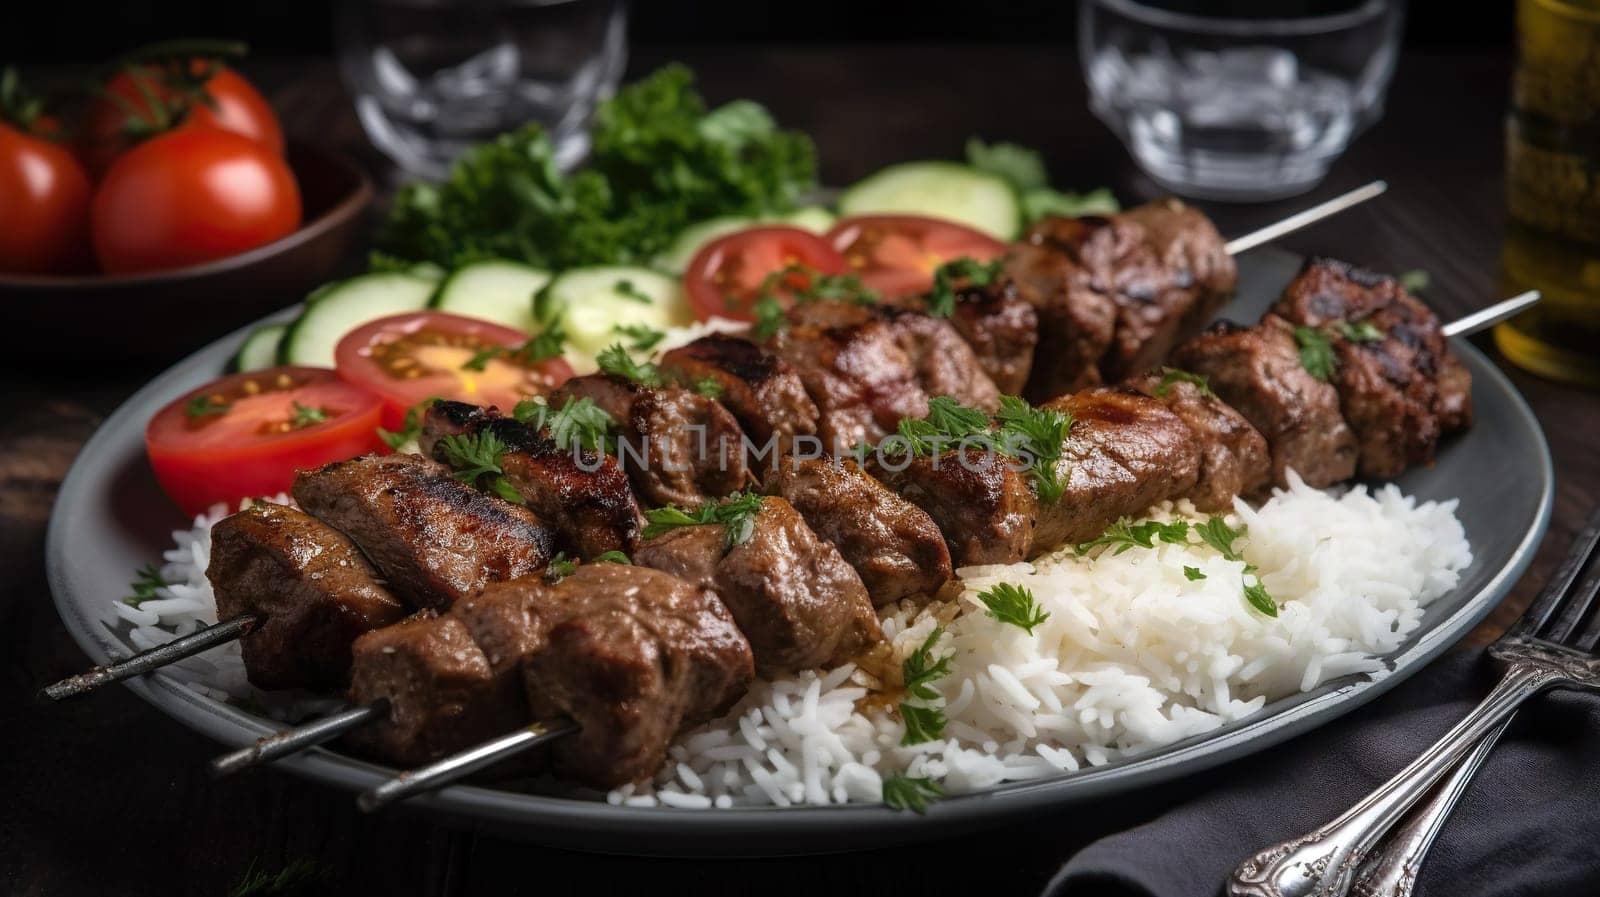 Grilled meat skewers served with rice and fresh salad